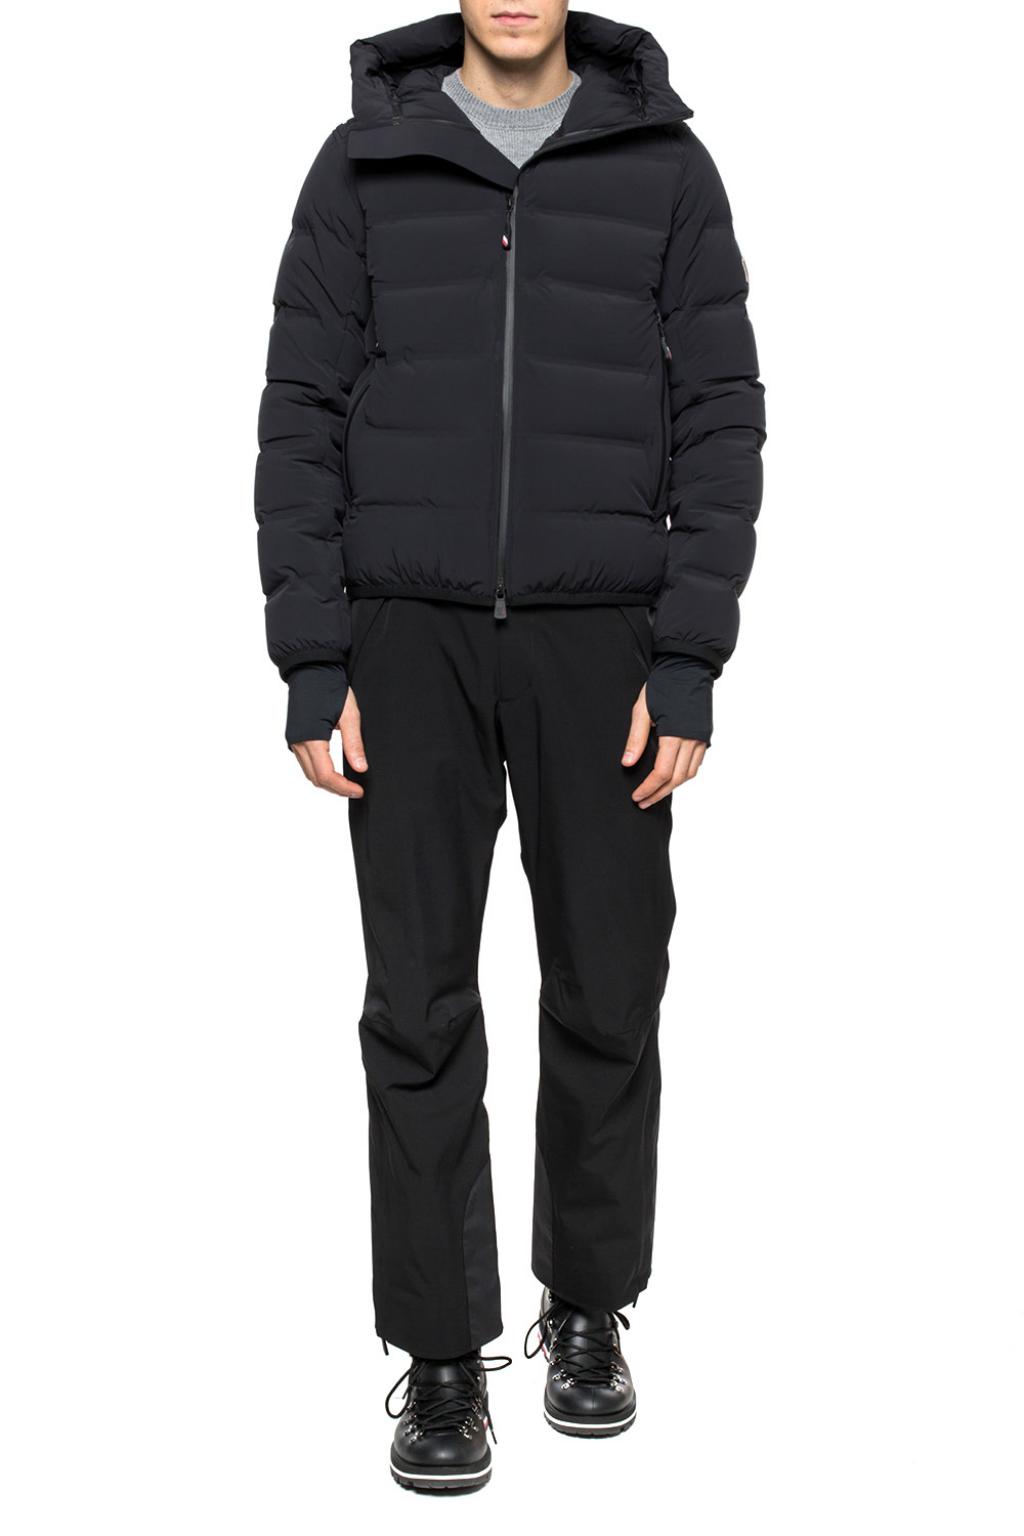 Black 'Lagorai' quilted down jacket Moncler Grenoble - Vitkac Germany